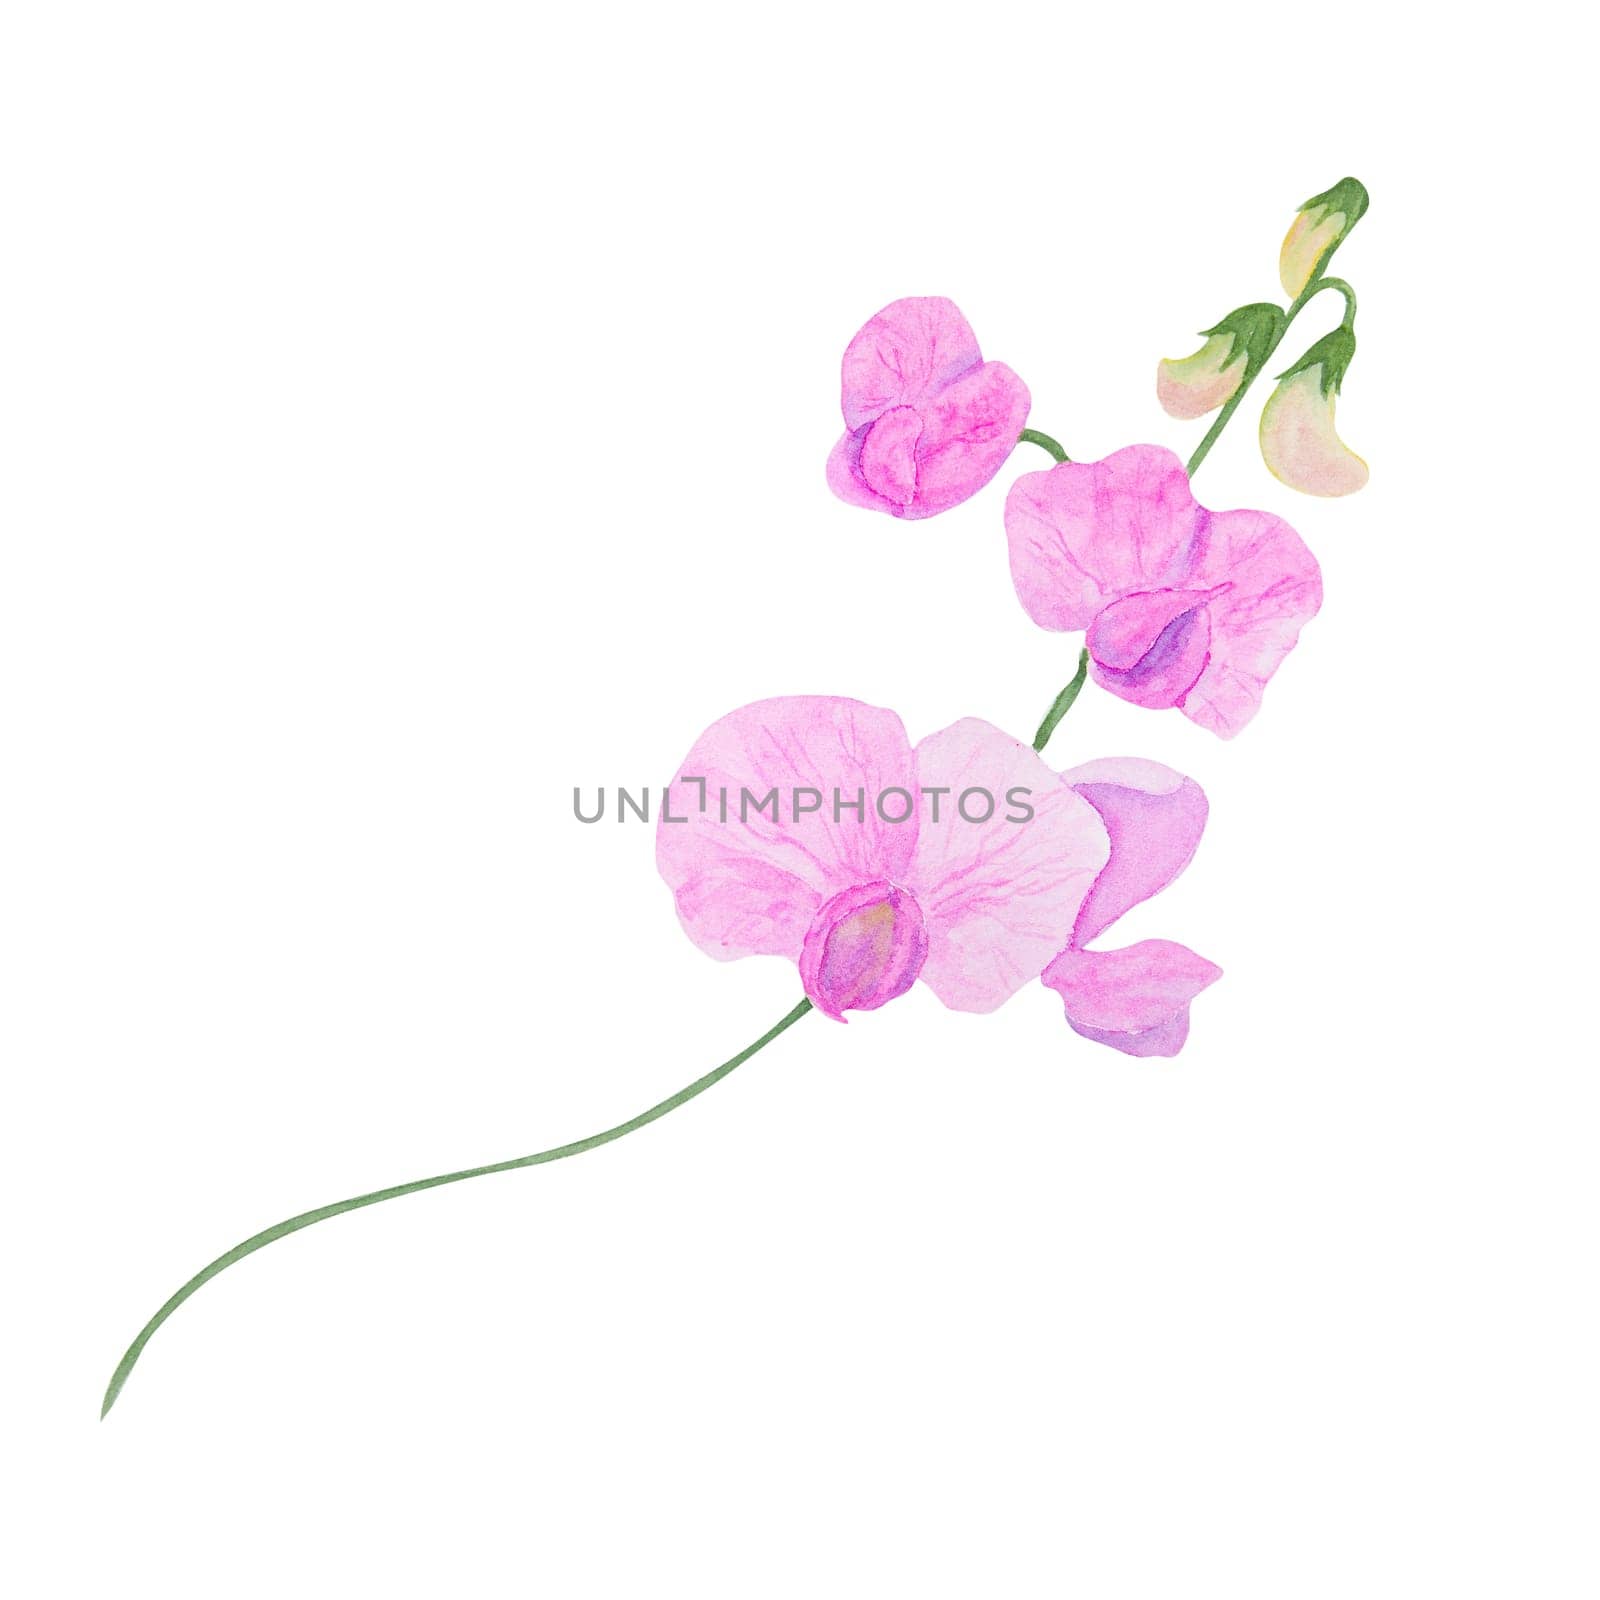 Pink Lathyrus watercolor illustration. Hand drawn botanical painting, floral sketch. Colorful flower clipart for summer or autumn design of wedding invitation, prints, greetings, sublimation, textile by florainlove_art